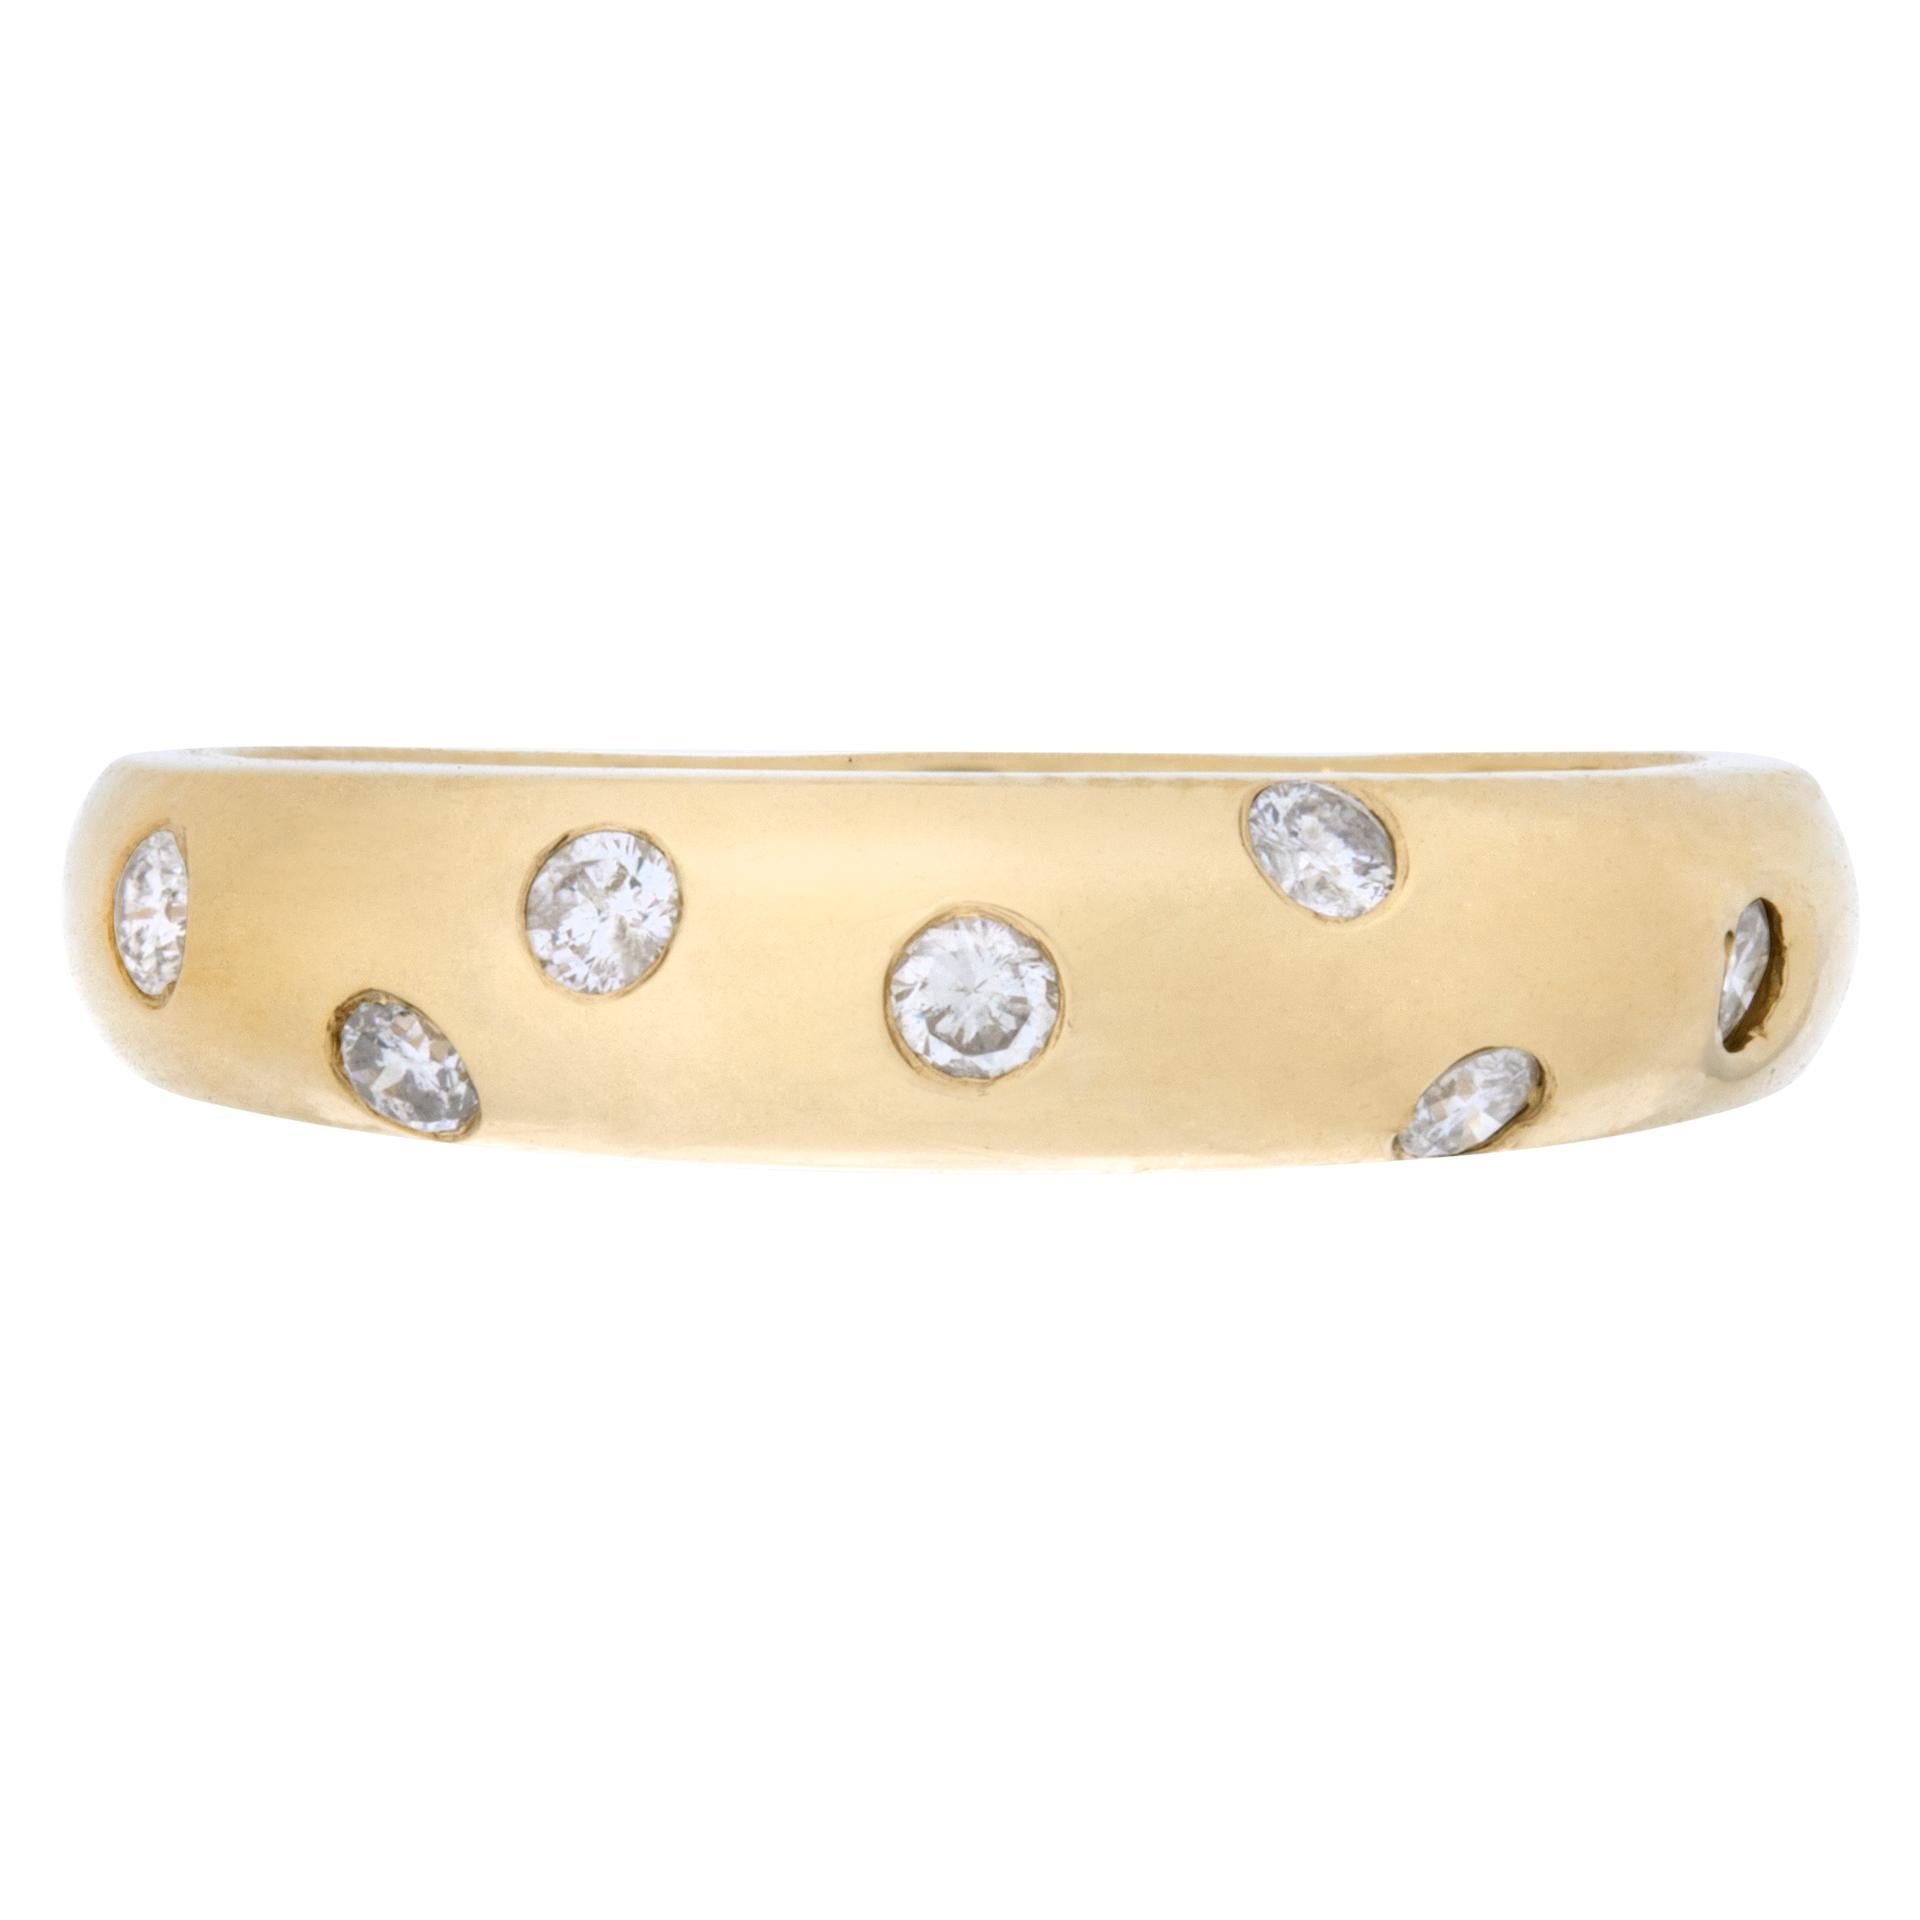 Bezel set diamond ring in 14k yellow gold with 0.14 carats in round brilliant diamonds. Size 8This Diamond ring is currently size 8 and some items can be sized up or down, please ask! It weighs 2.4 pennyweights and is 14k.
